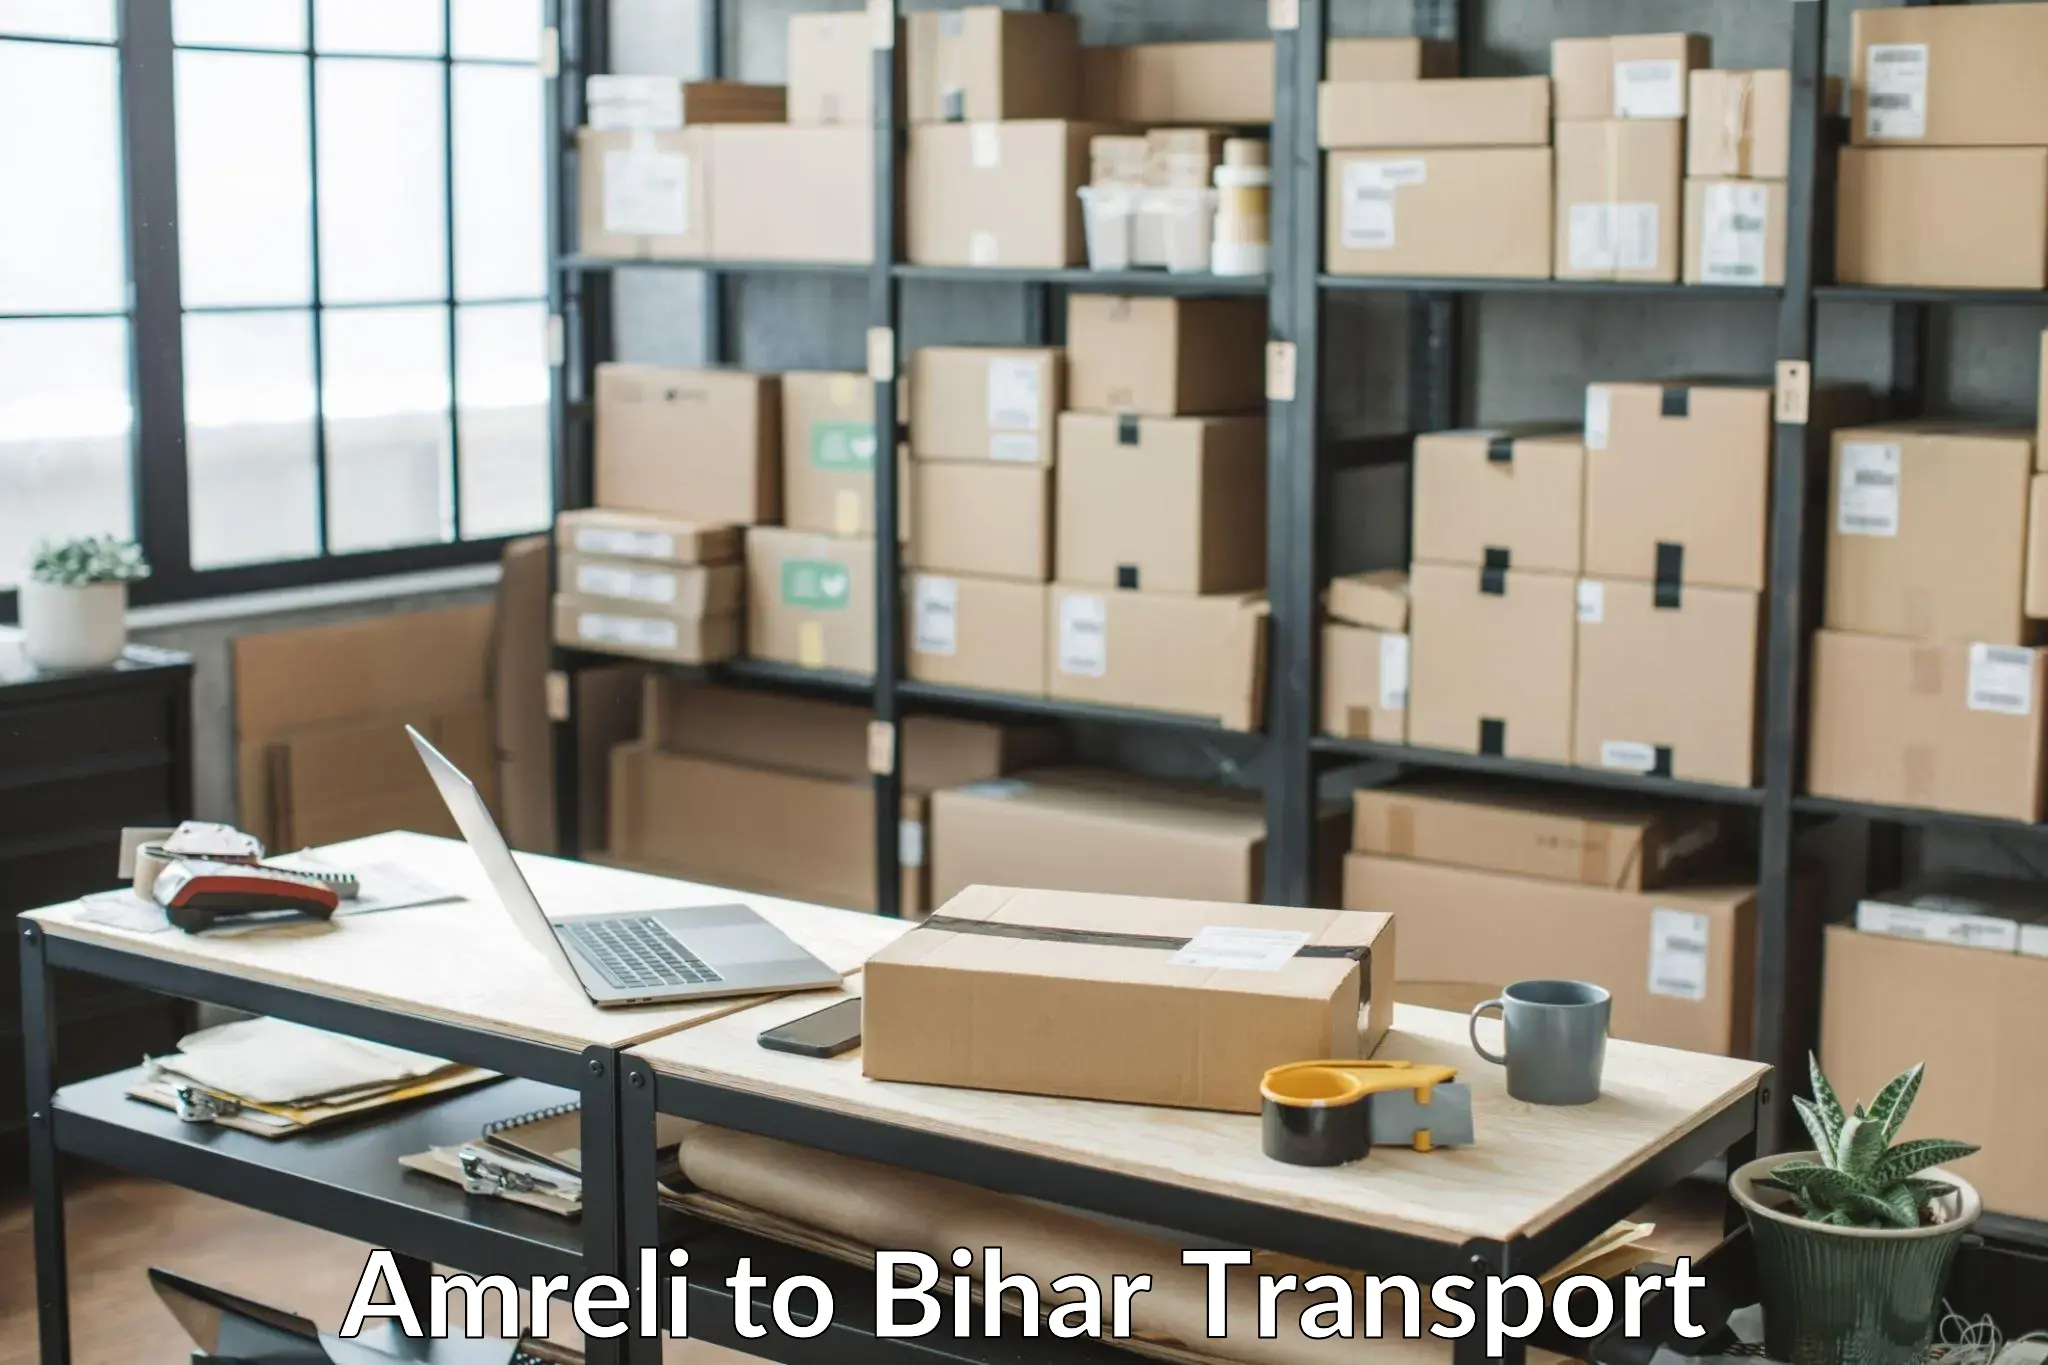 Road transport online services in Amreli to Bhojpur